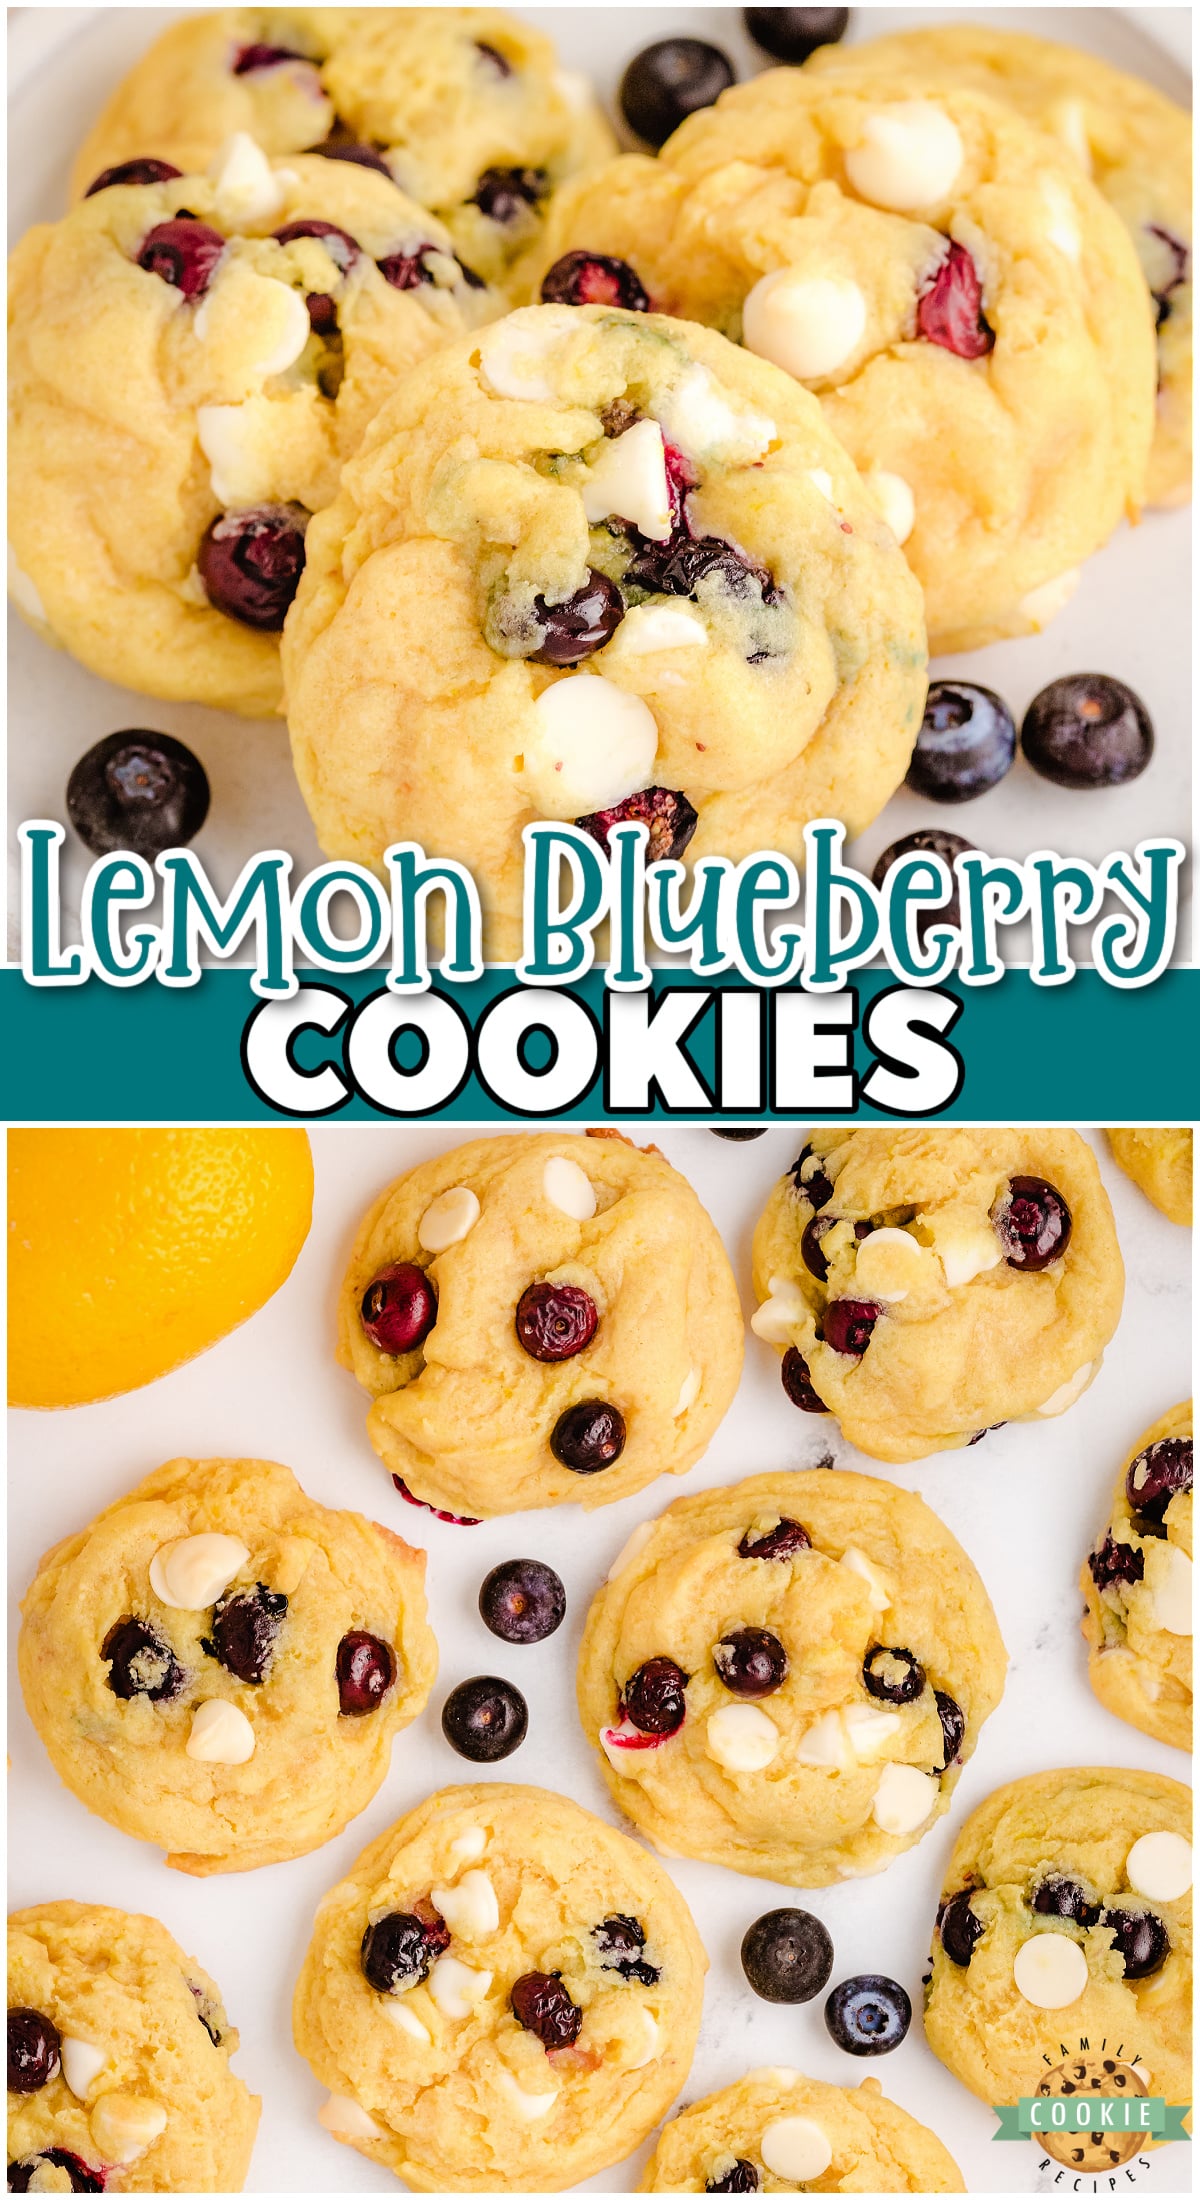 Lemon Blueberry Cookies made with fresh blueberries, folded into a sweet lemon cookie dough! Soft pudding cookie recipe with lovely bright, fresh flavor from blueberries and lemon zest!